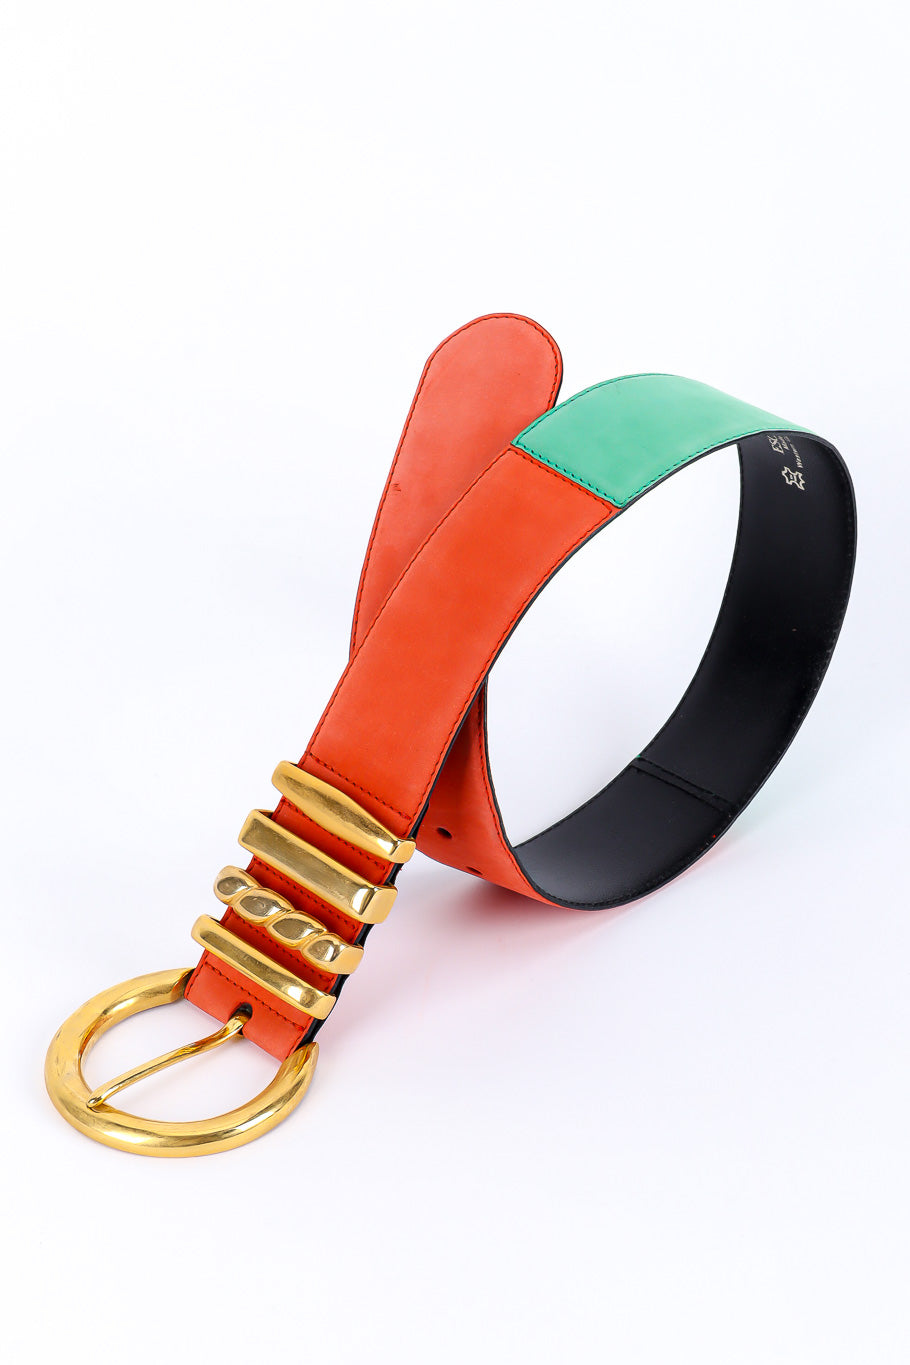 leather color block belt with heavy gold metal hardware by Escada flat lay loop @recessla